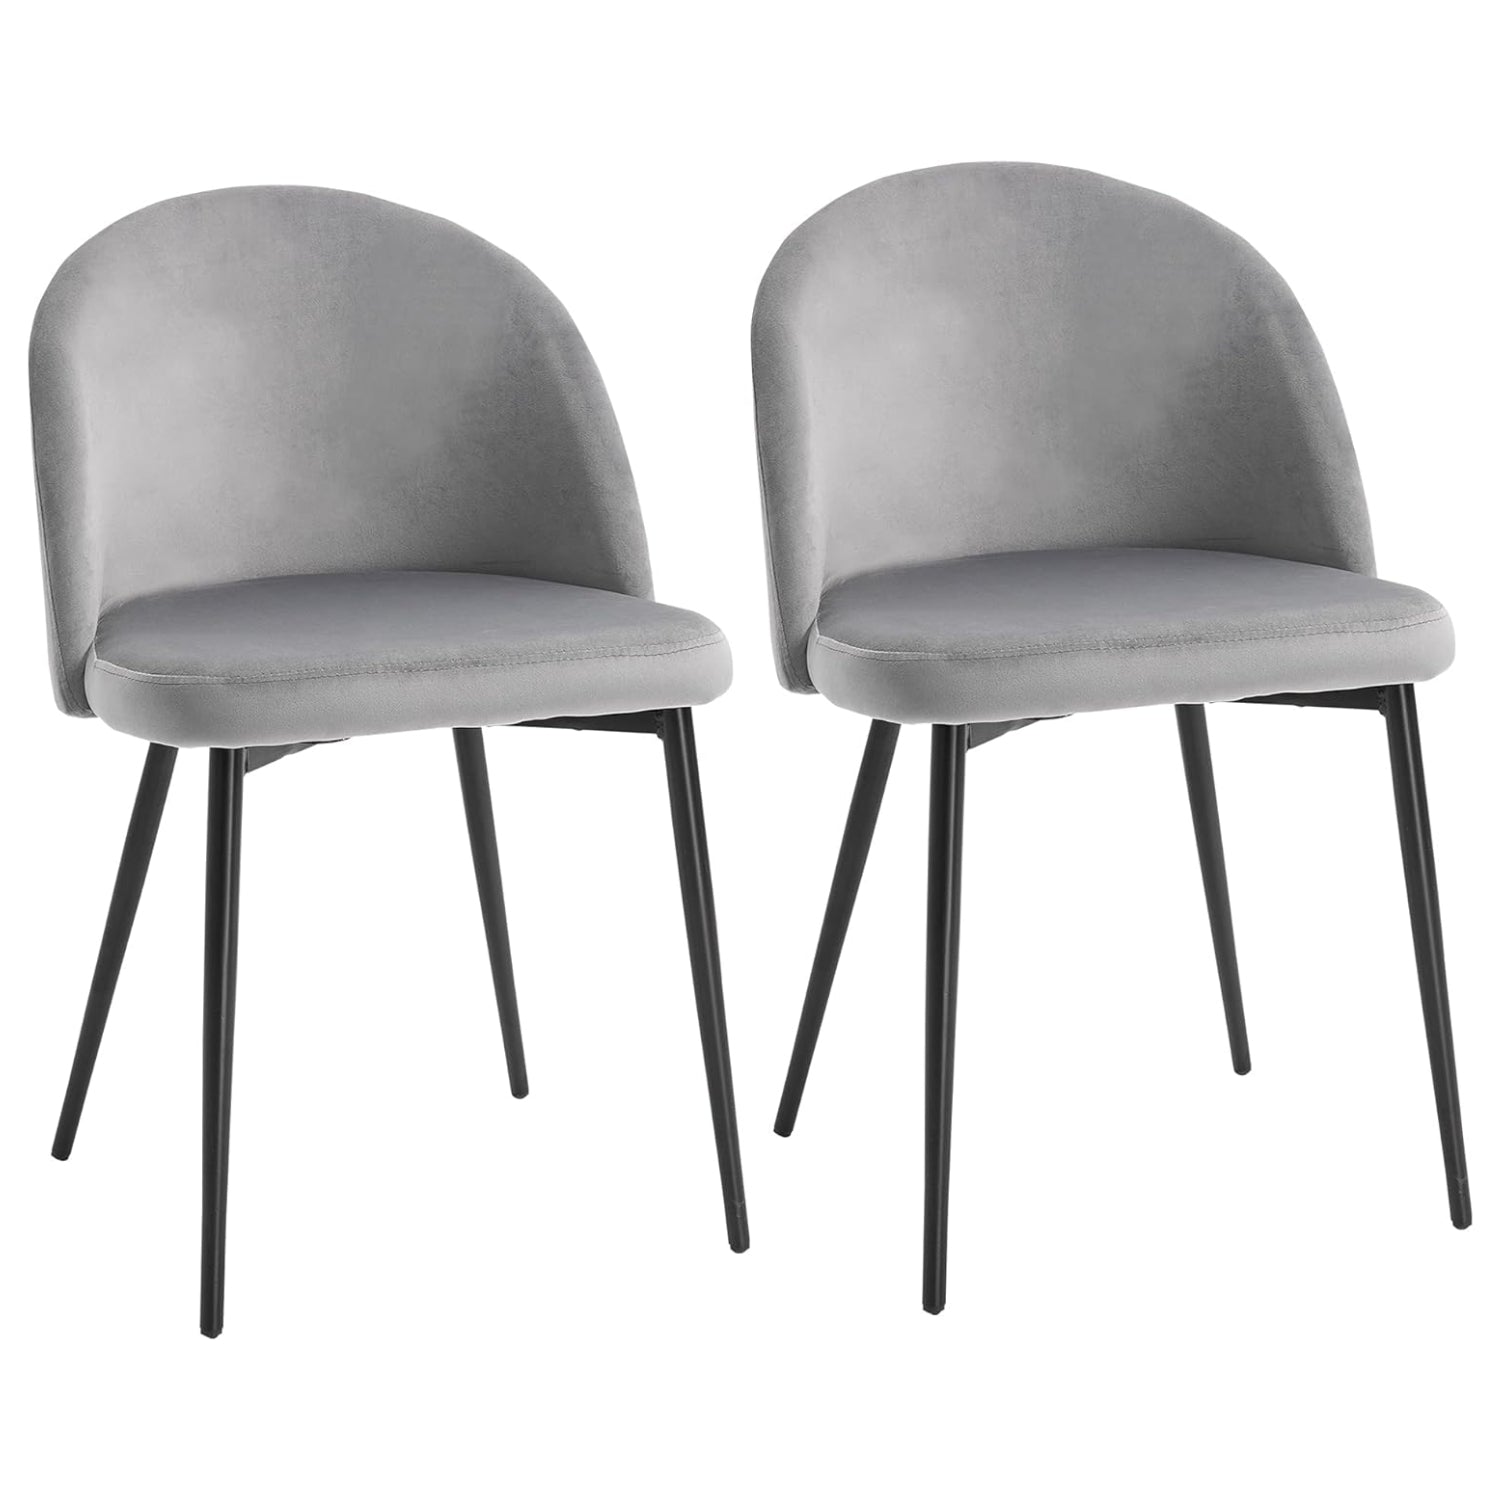 Two grey velvet dining chairs by willa arlo placed side by side.